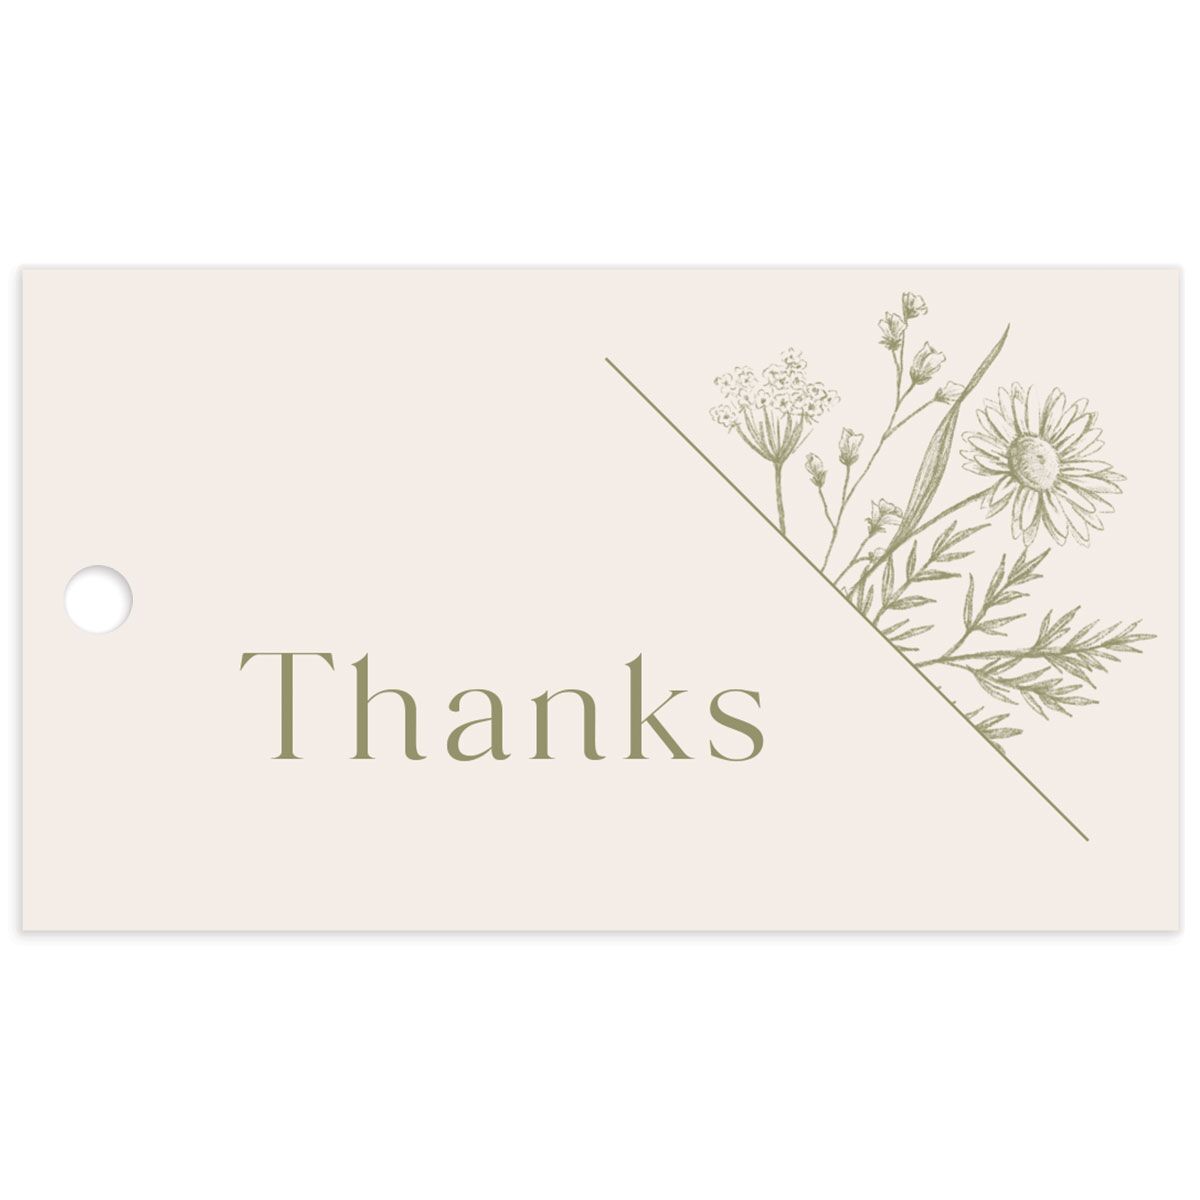 Vintage Favor Gift Tags by Vera Wang